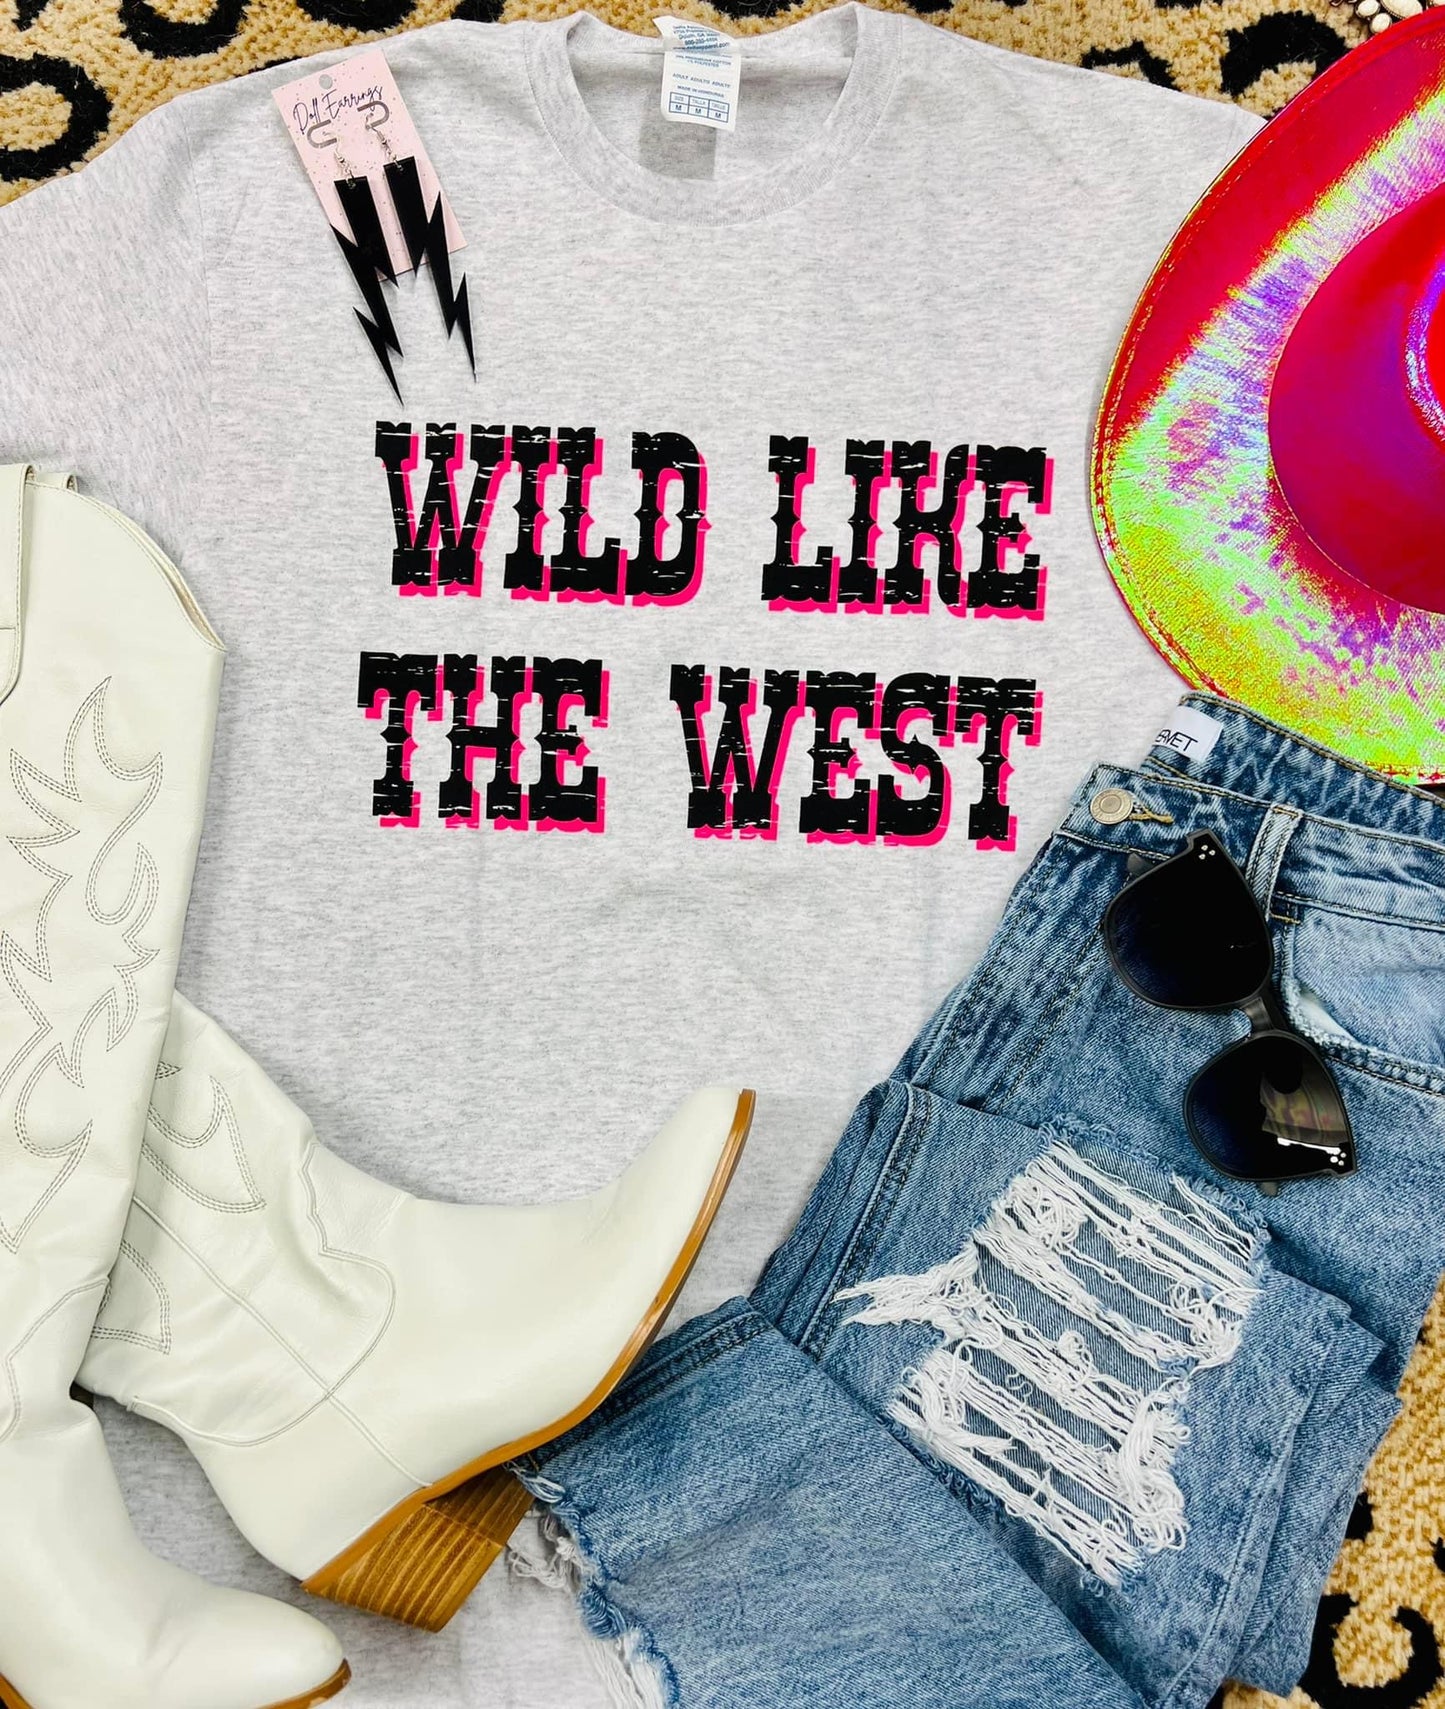 Wild Like the West Graphic Tee